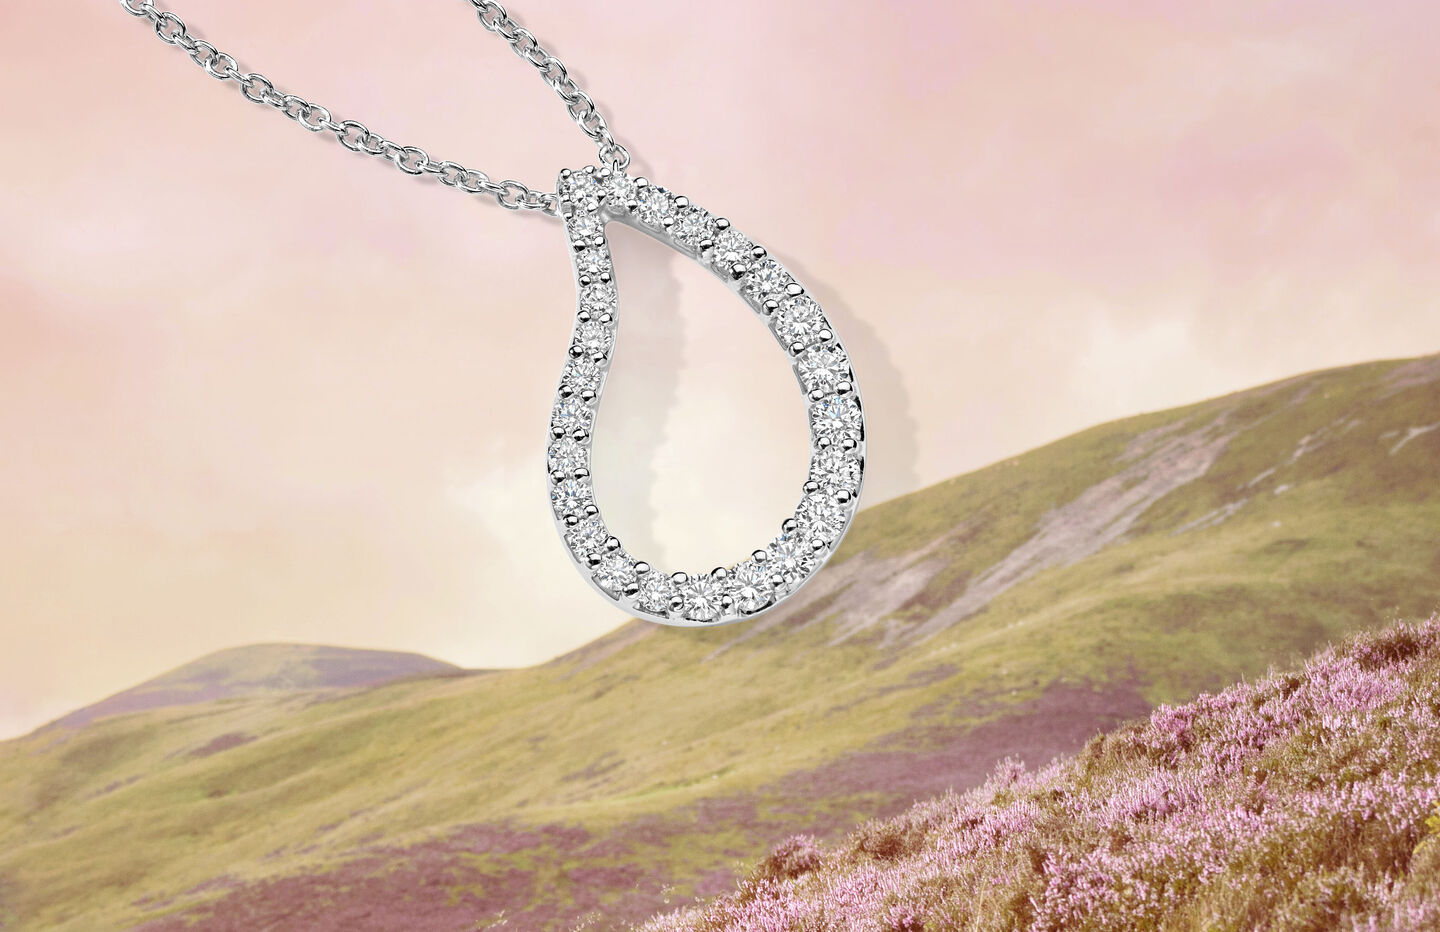 Birks Pétale white gold and diamond pendant on a background of nature.